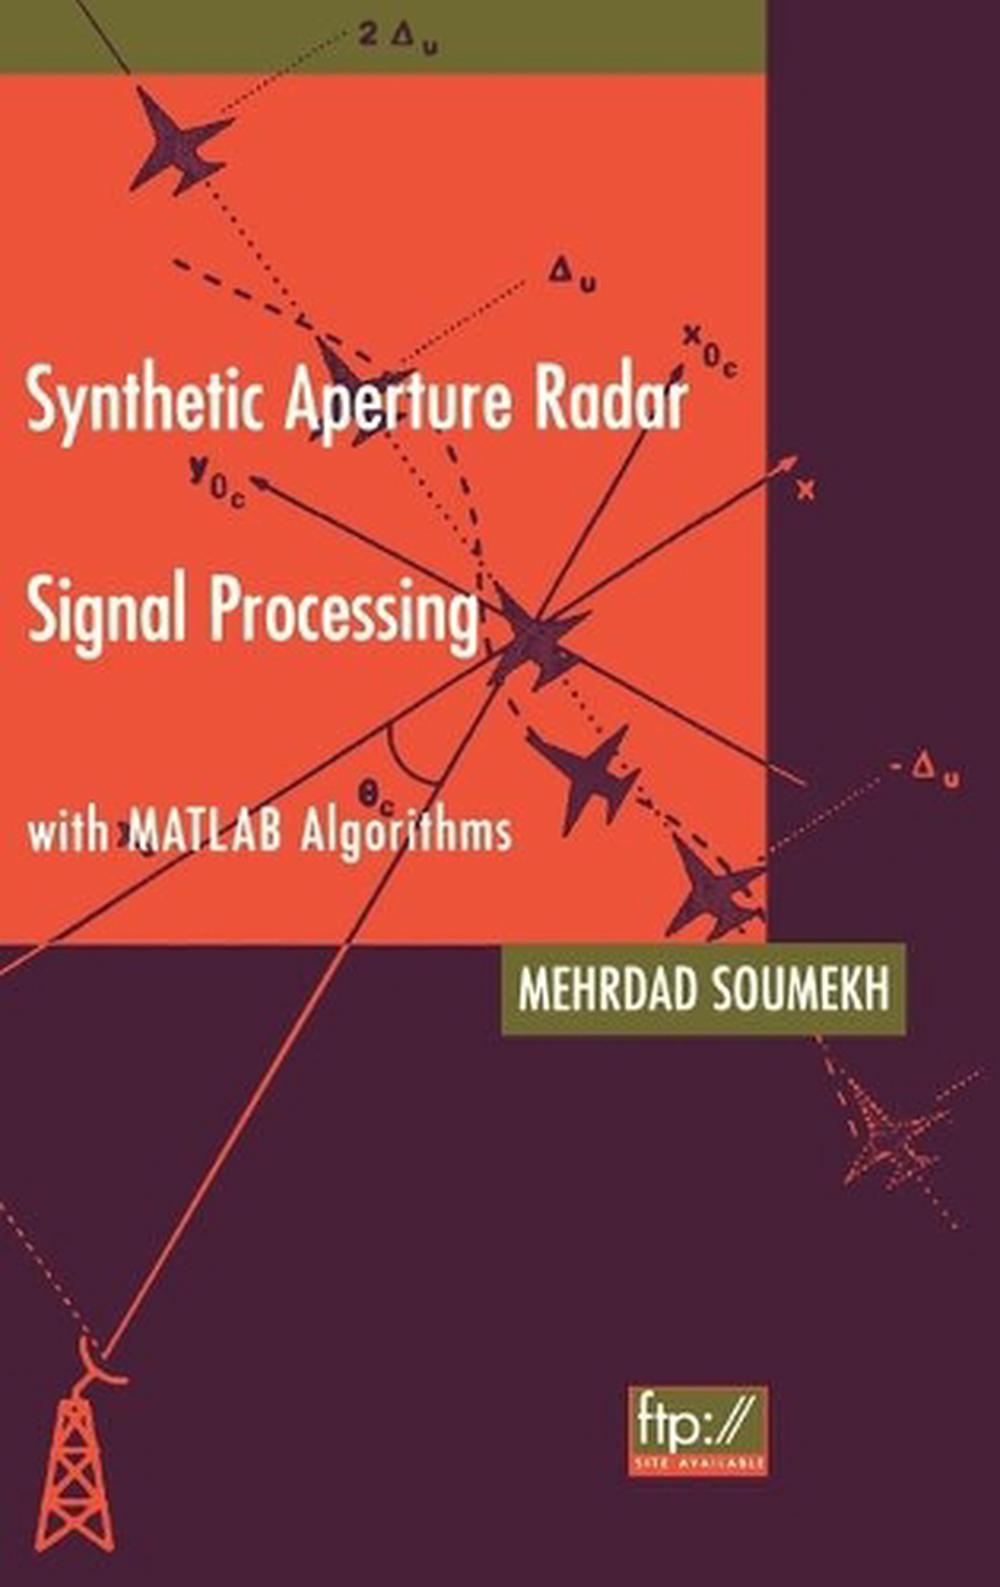 Synthetic Aperture Radar Signal Processing with MATLAB Algorithms by